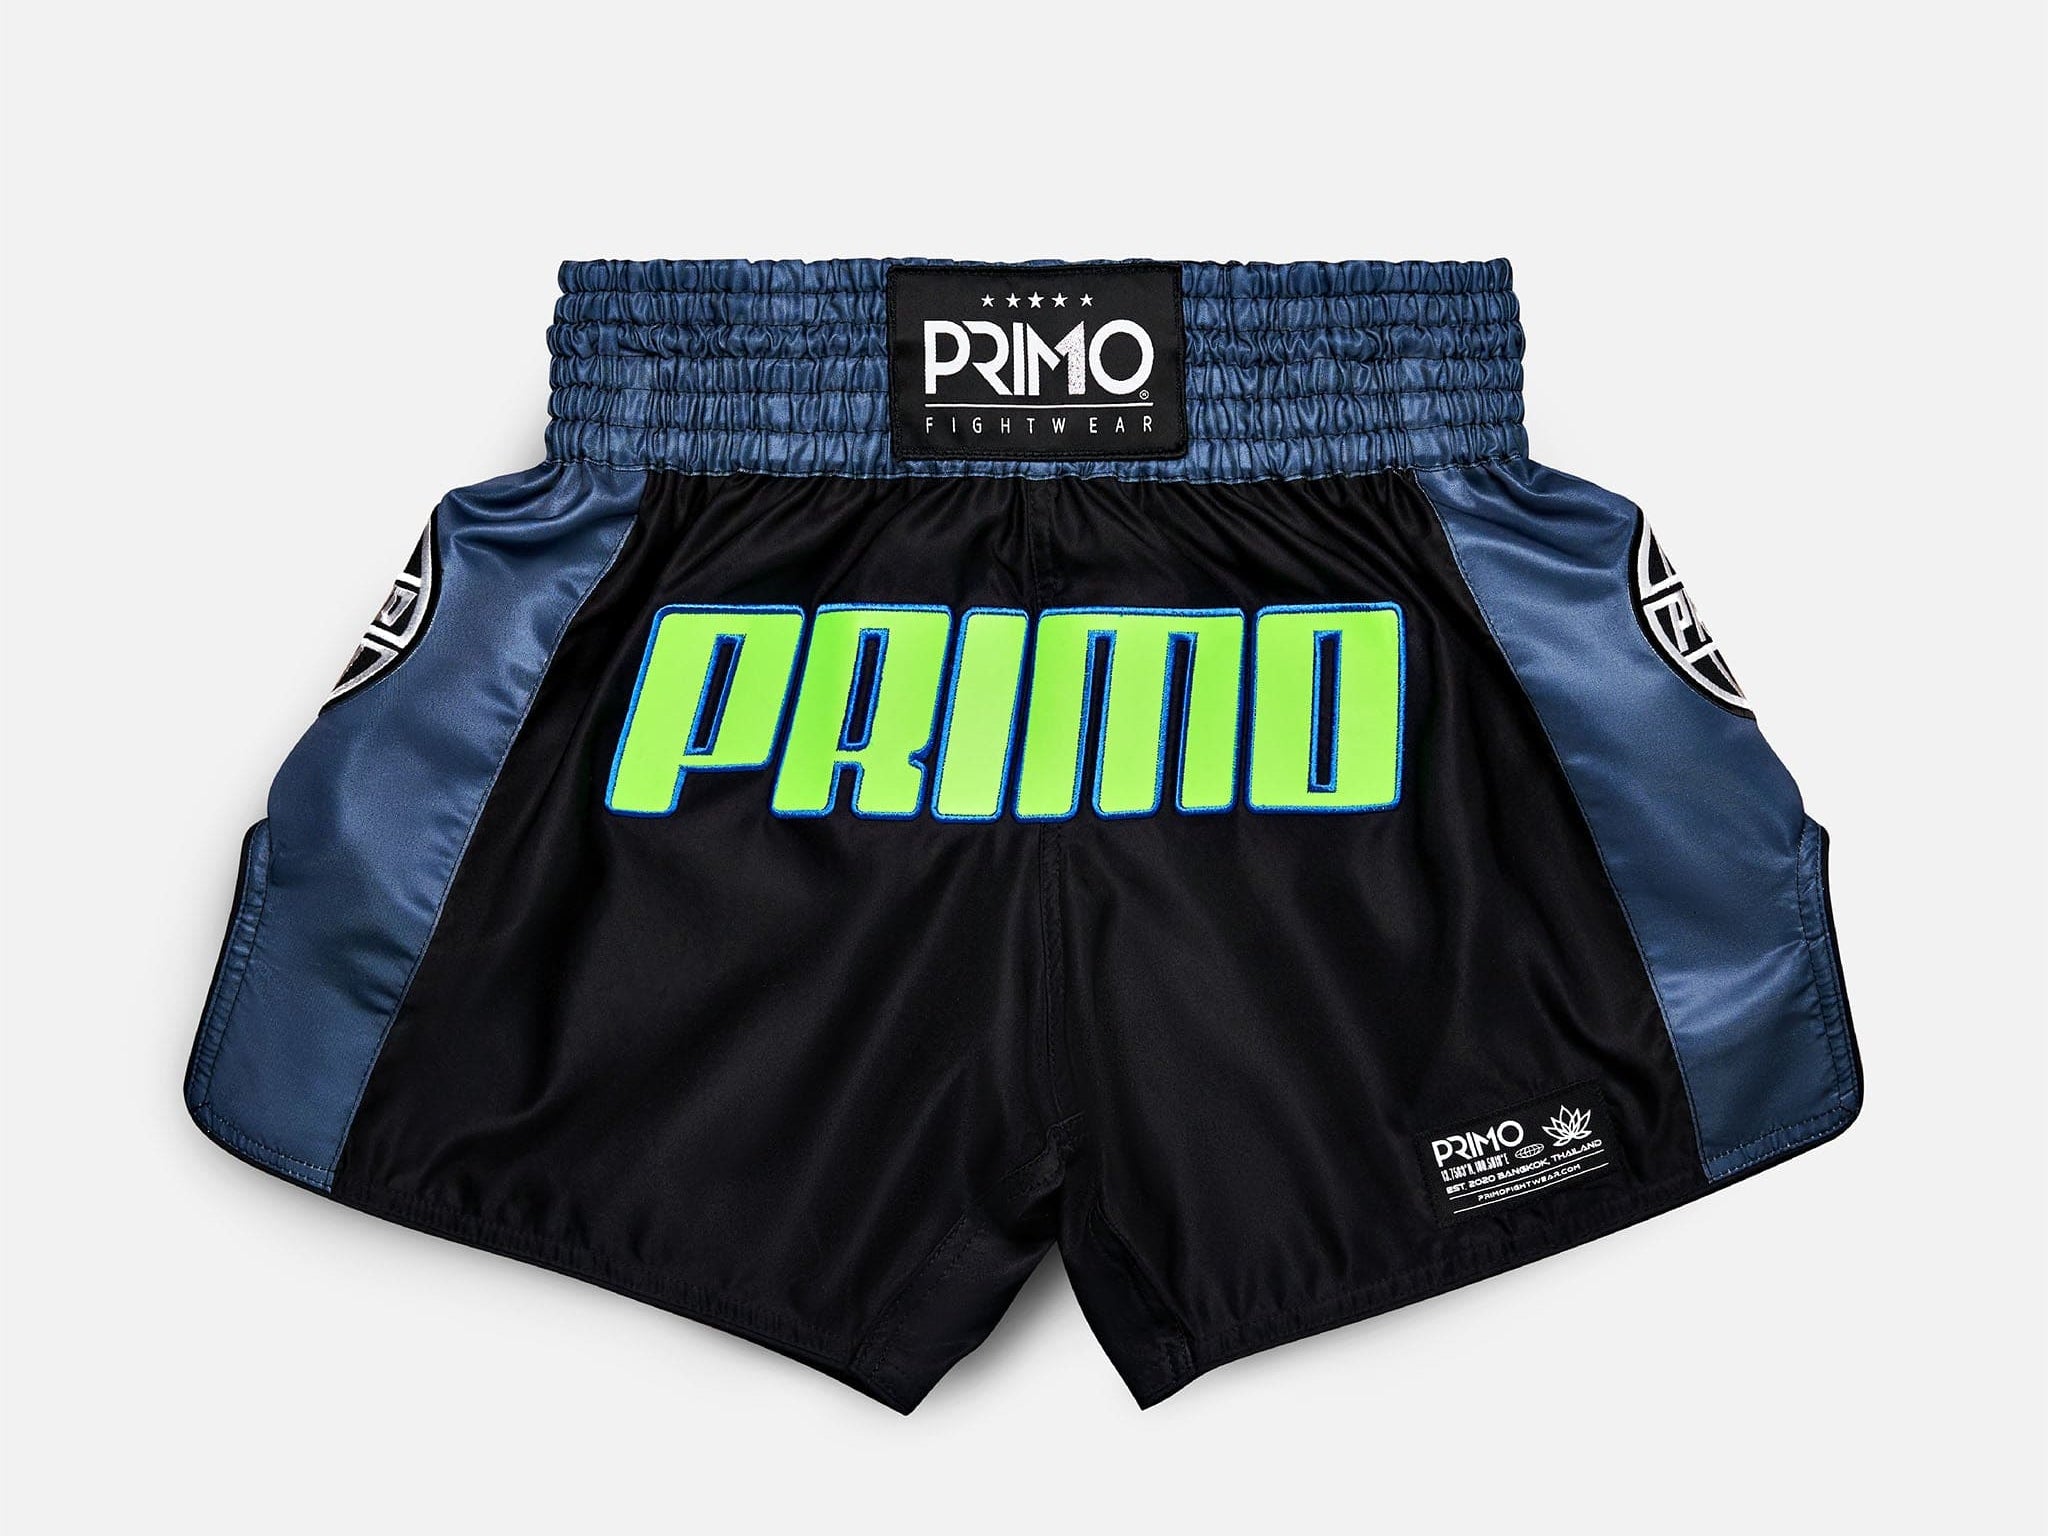 Primo Fight Wear Official Muay Thai Shorts - Trinity Series - Black